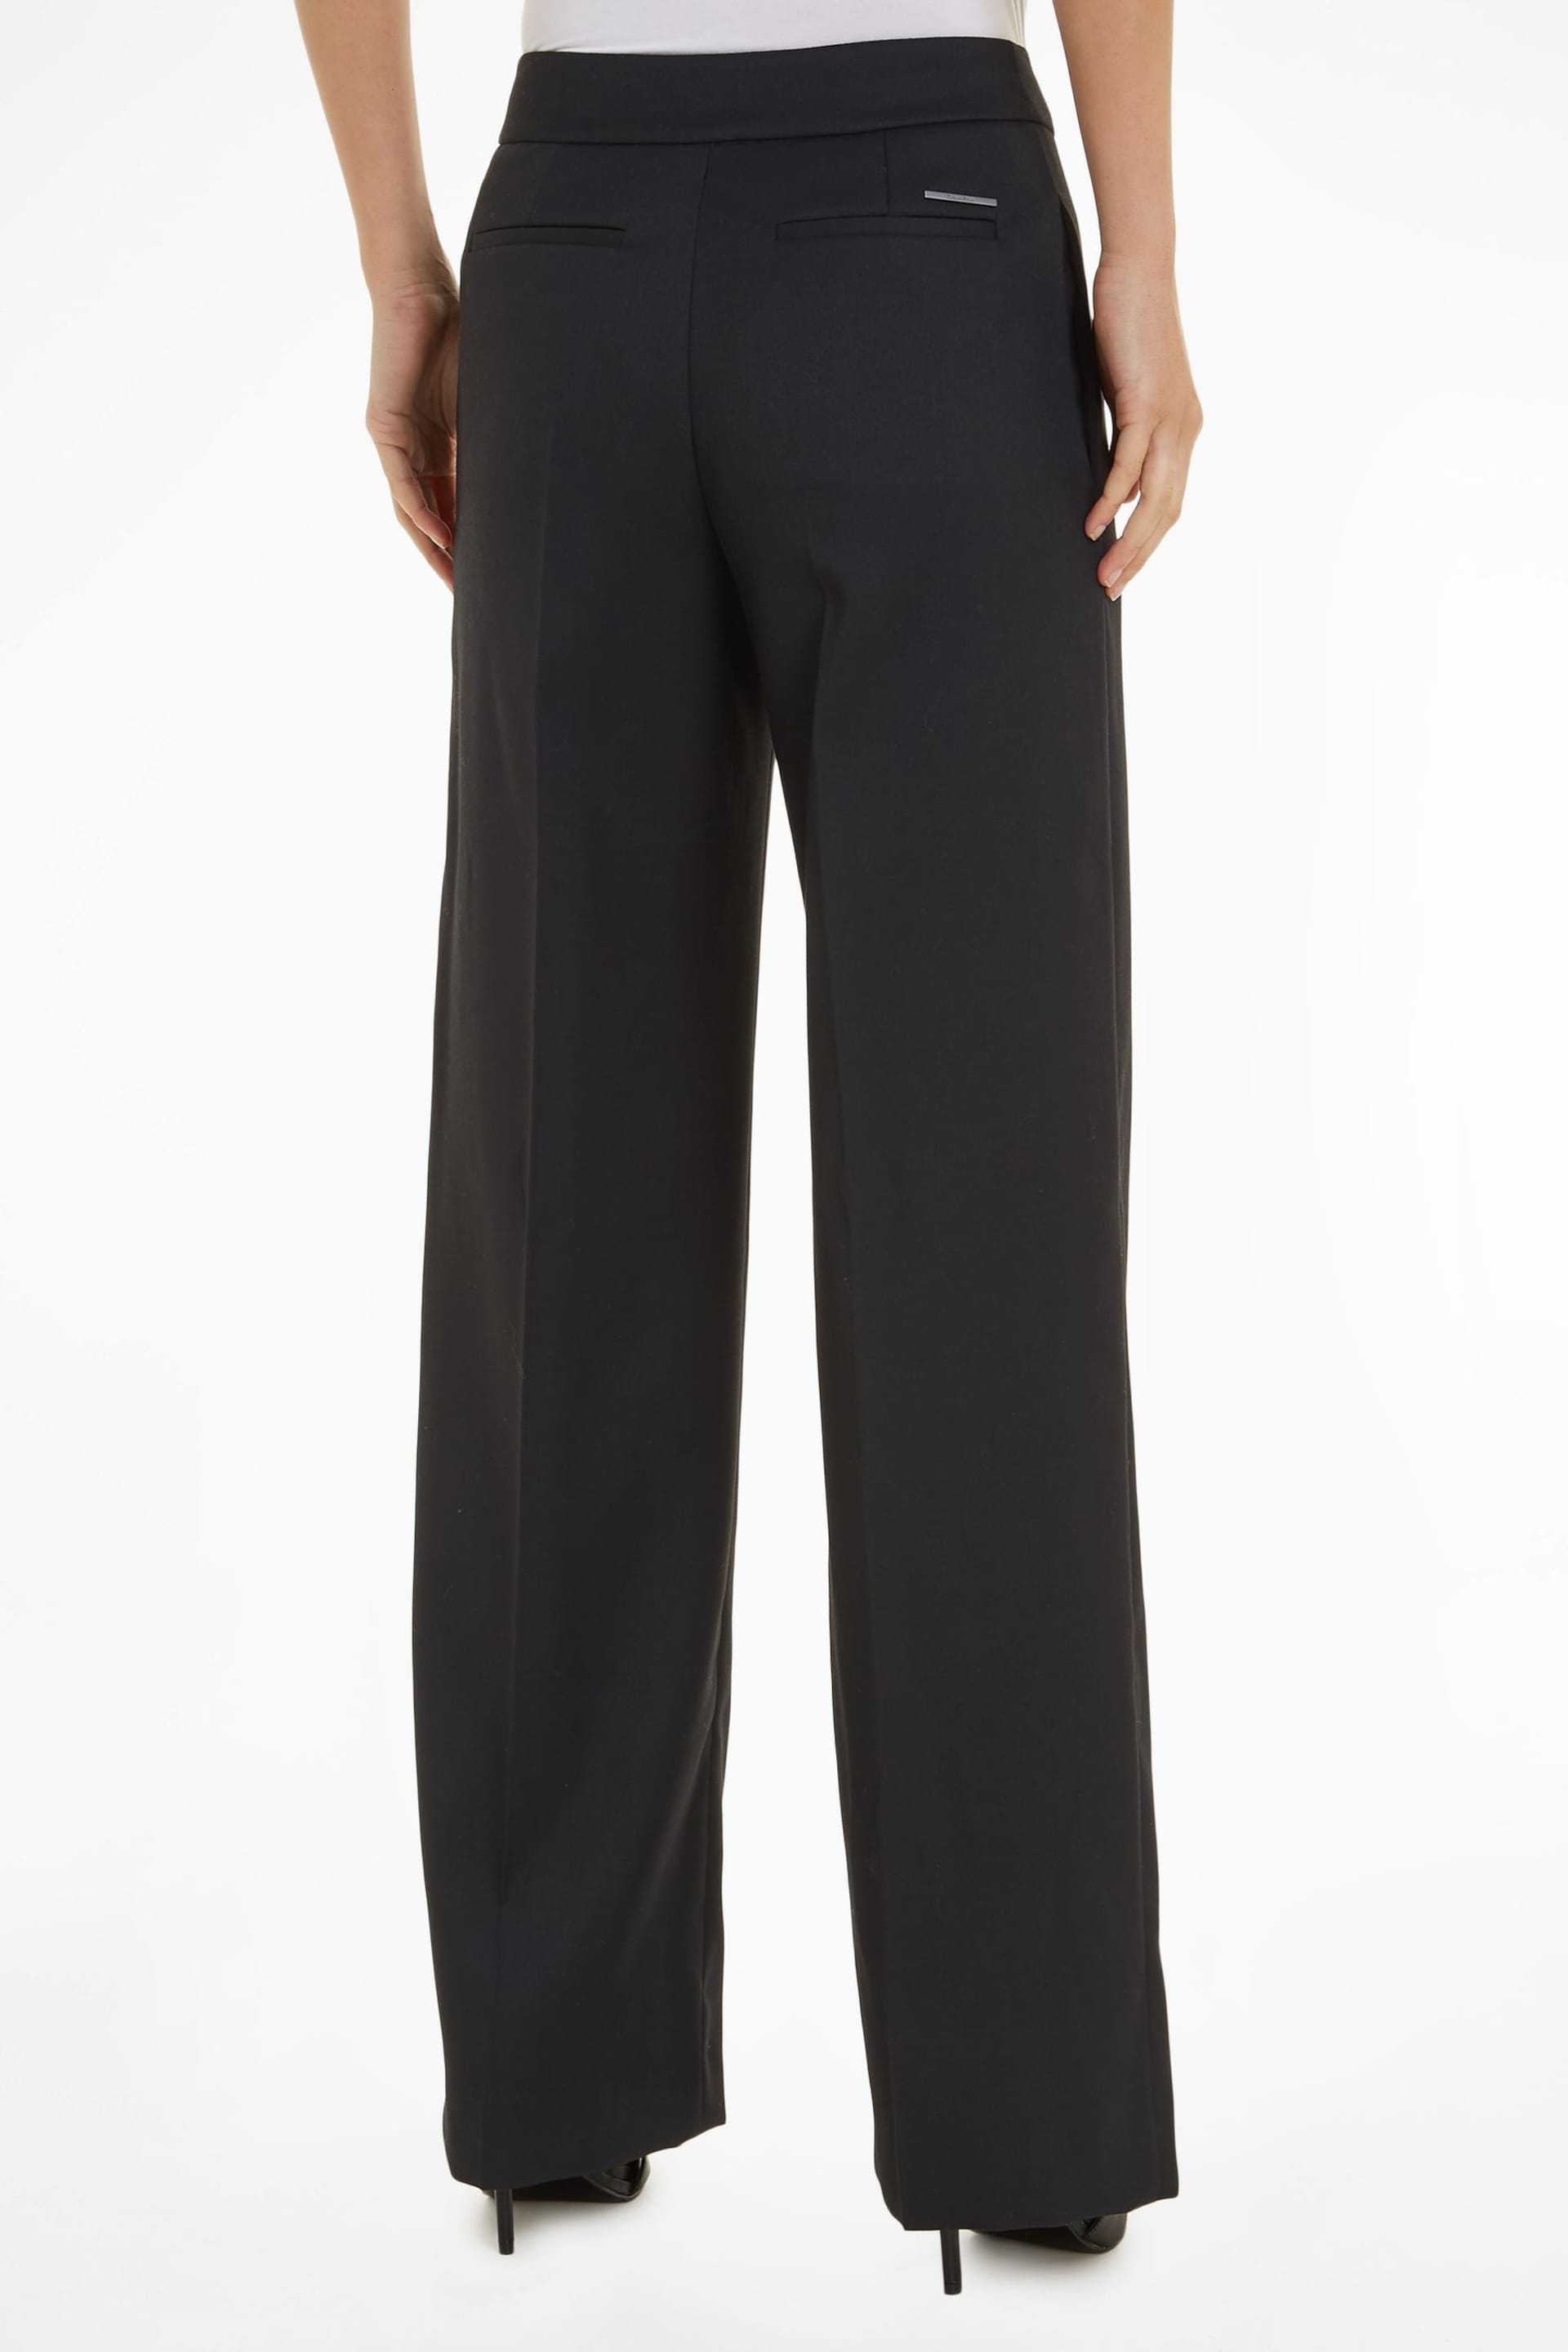 Calvin Klein Black Tailored Wide Leg Trousers - Image 2 of 6